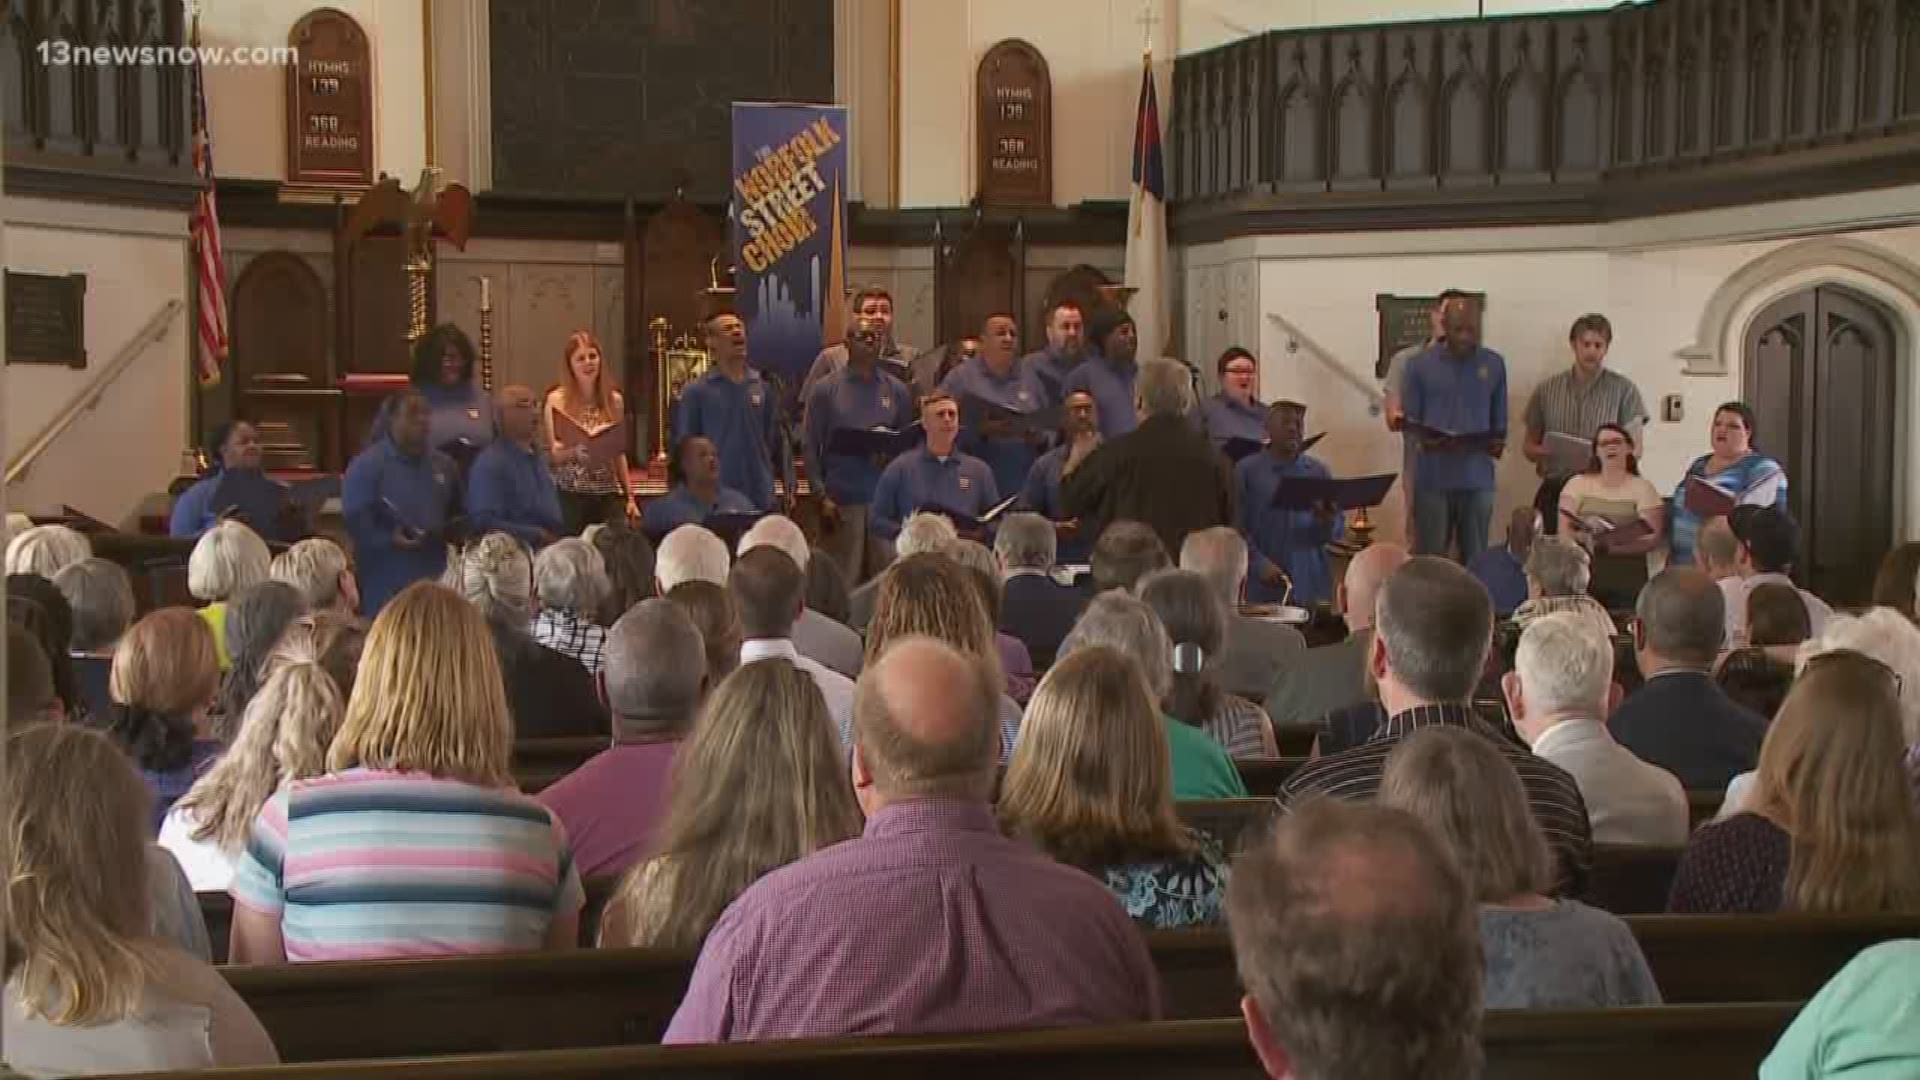 The Norfolk Street Choir offers a unique opportunity where singers can “have a voice.” Participants encourage and inspire one another and their listeners through music.